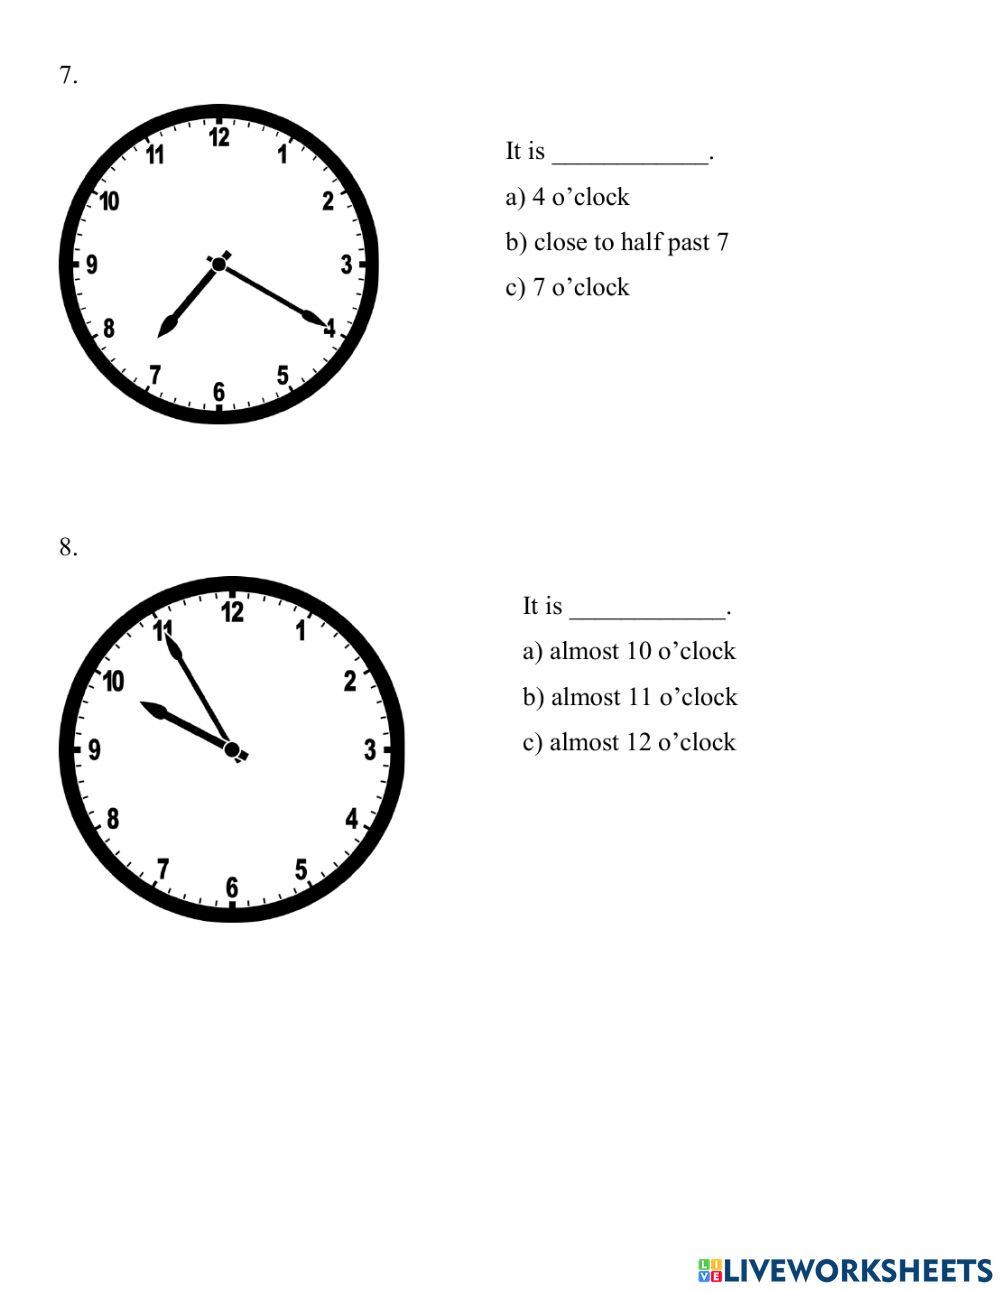 Estimating Time